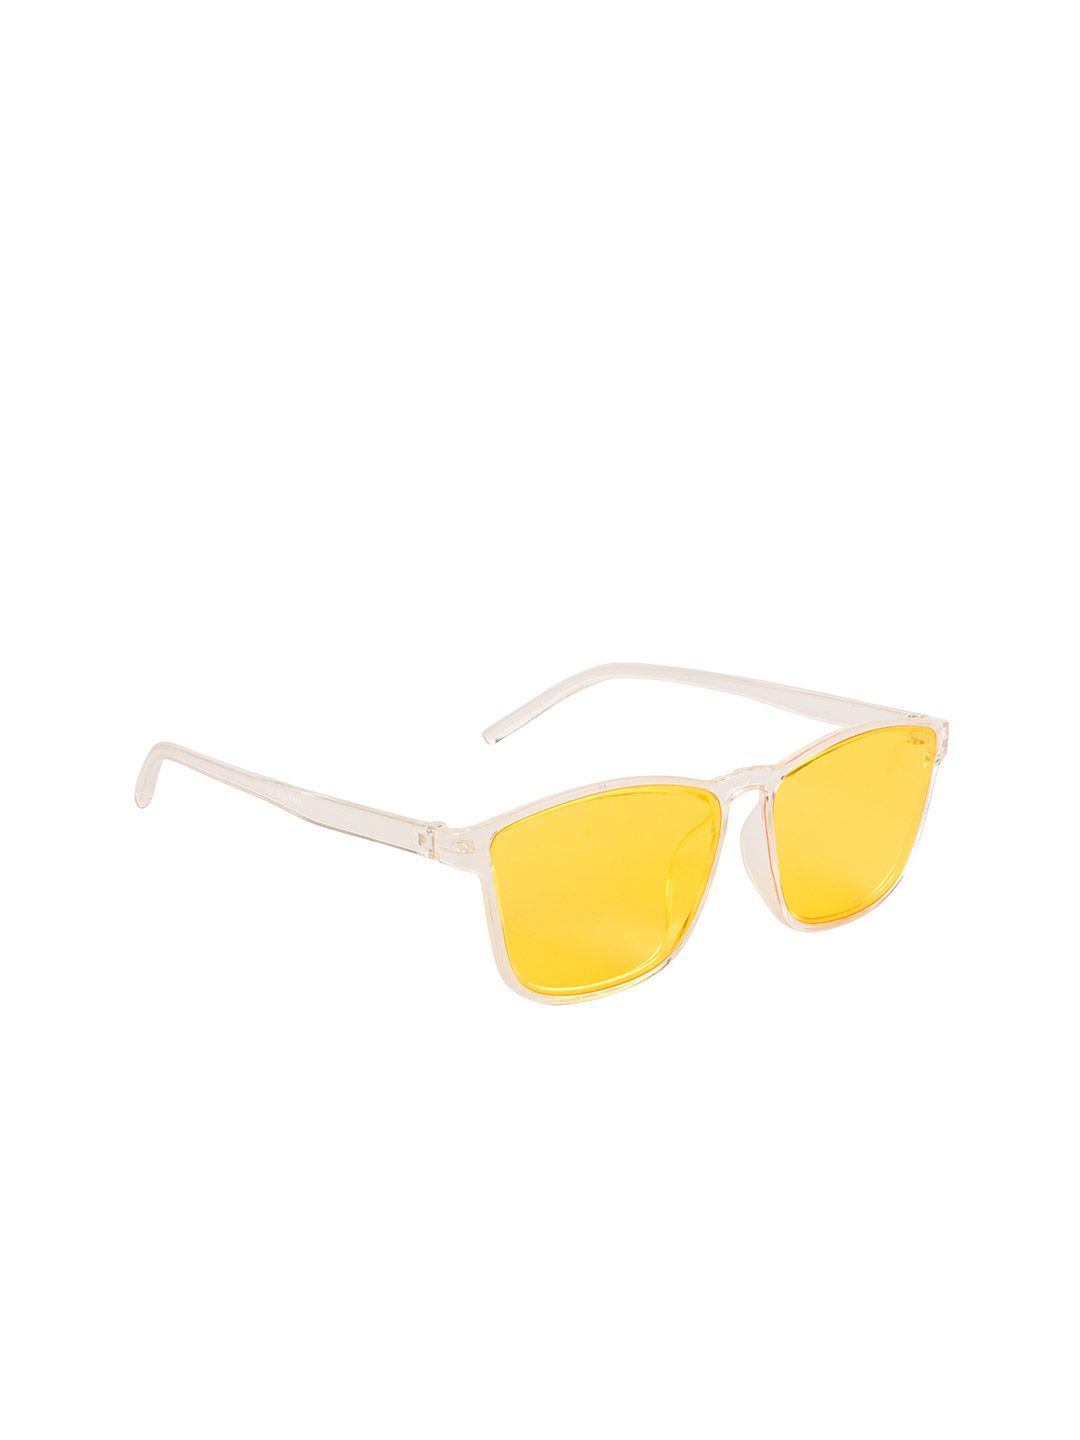 Voyage Unisex Yellow Lens & White Wayfarer Sunglasses with UV Protected Lens Price in India